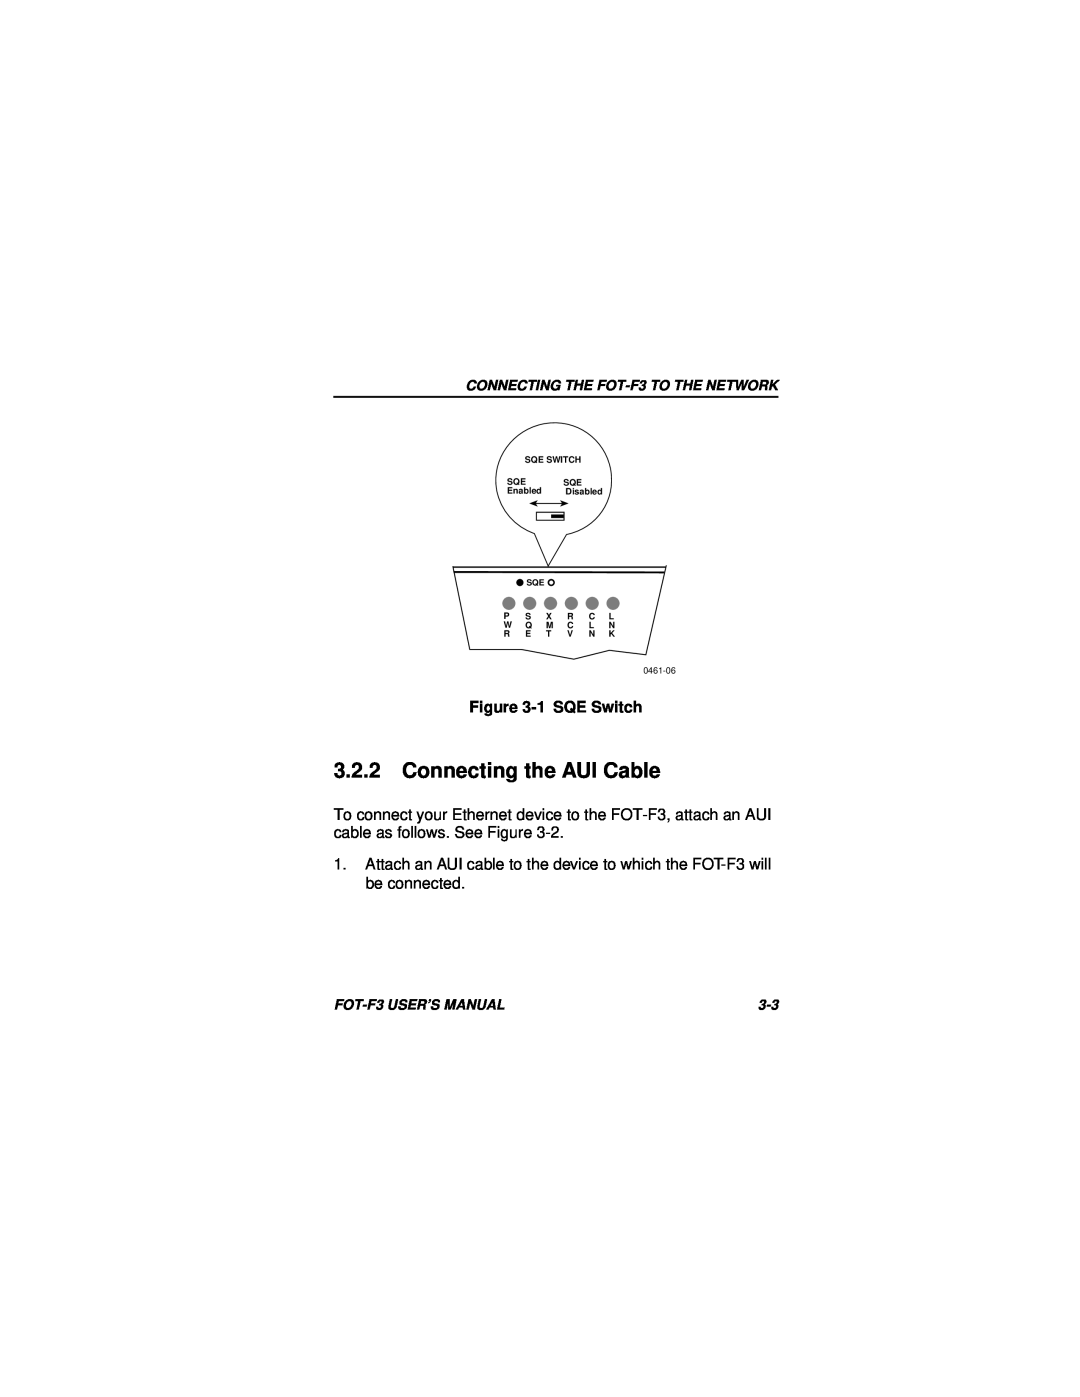 Cabletron Systems F3 user manual Connecting the AUI Cable, 1 SQE Switch 